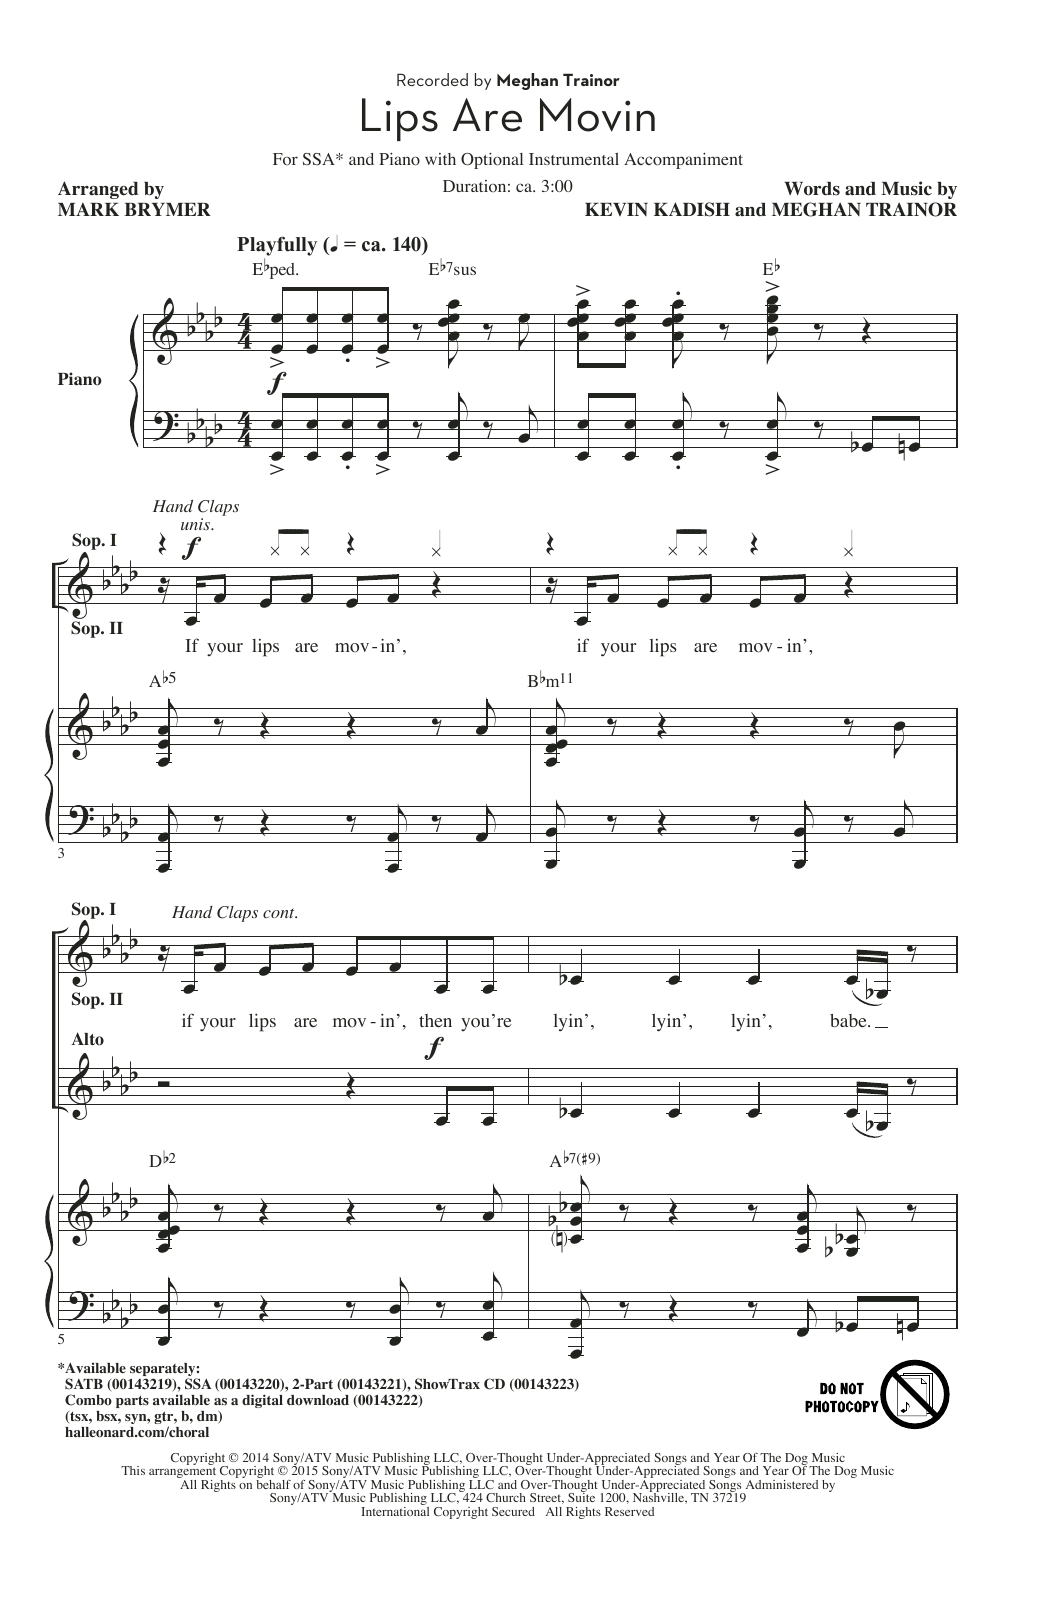 Download Meghan Trainor Lips Are Movin (arr. Mark Brymer) Sheet Music